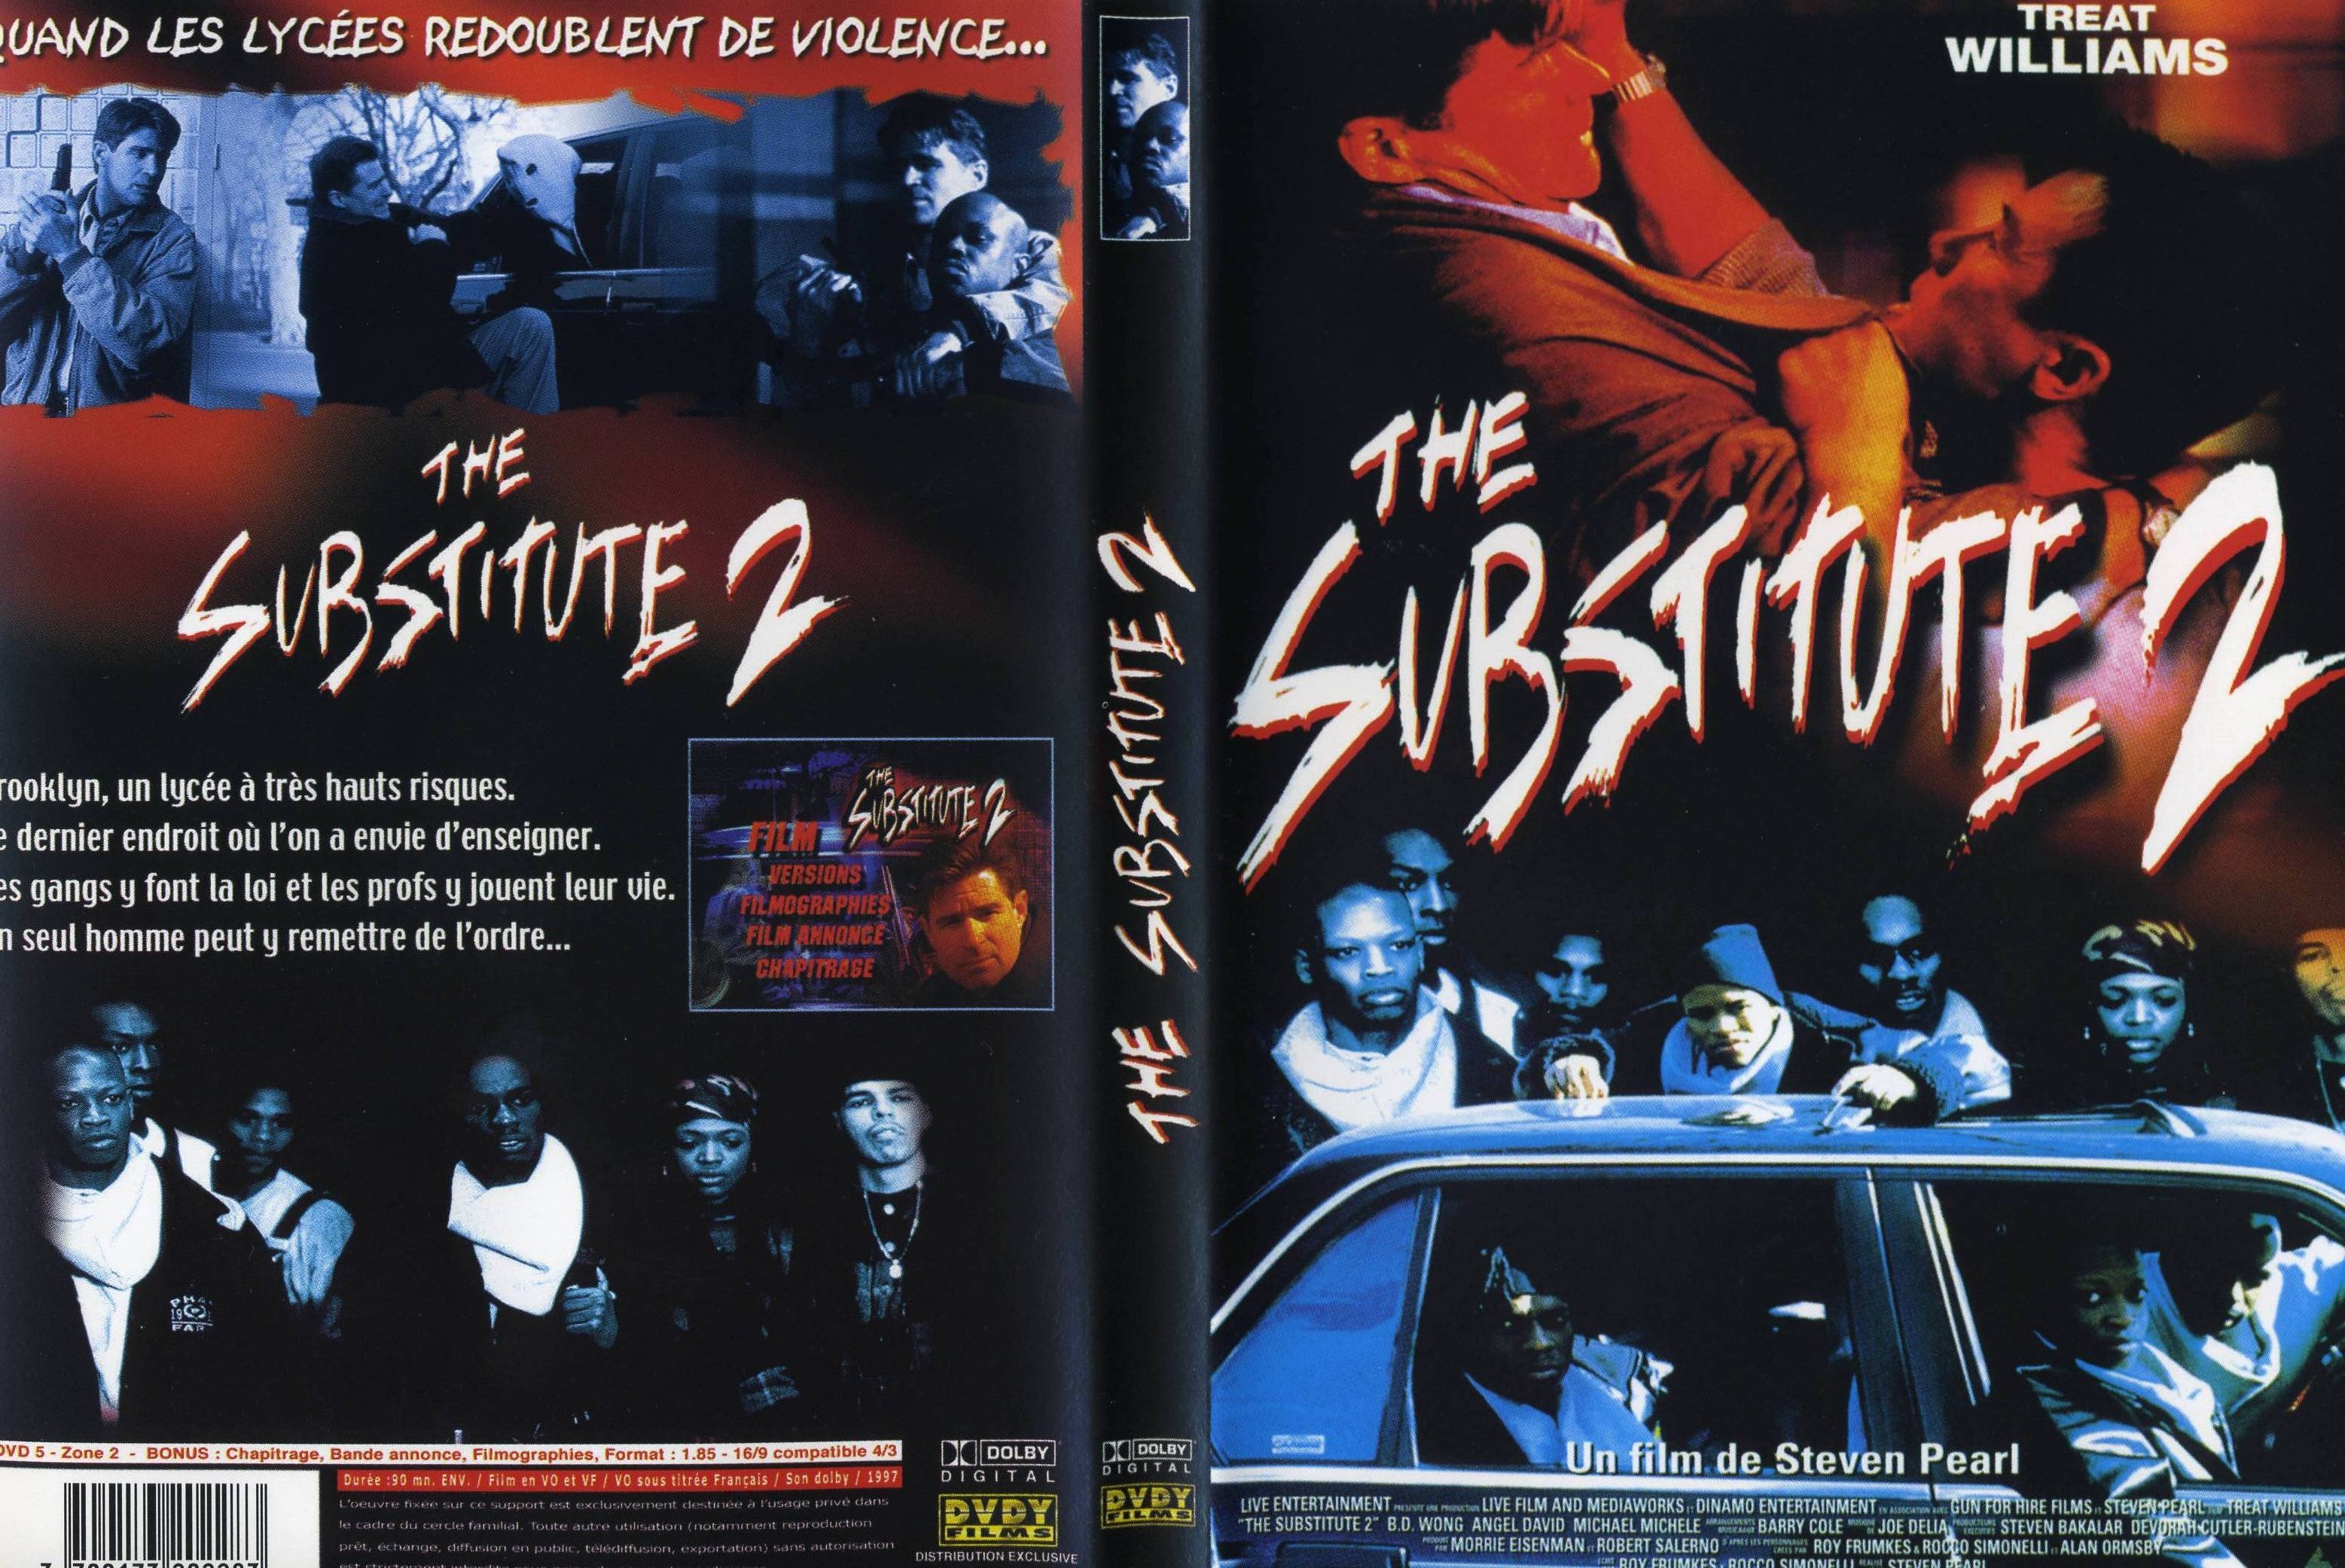 Jaquette DVD The substitute 2